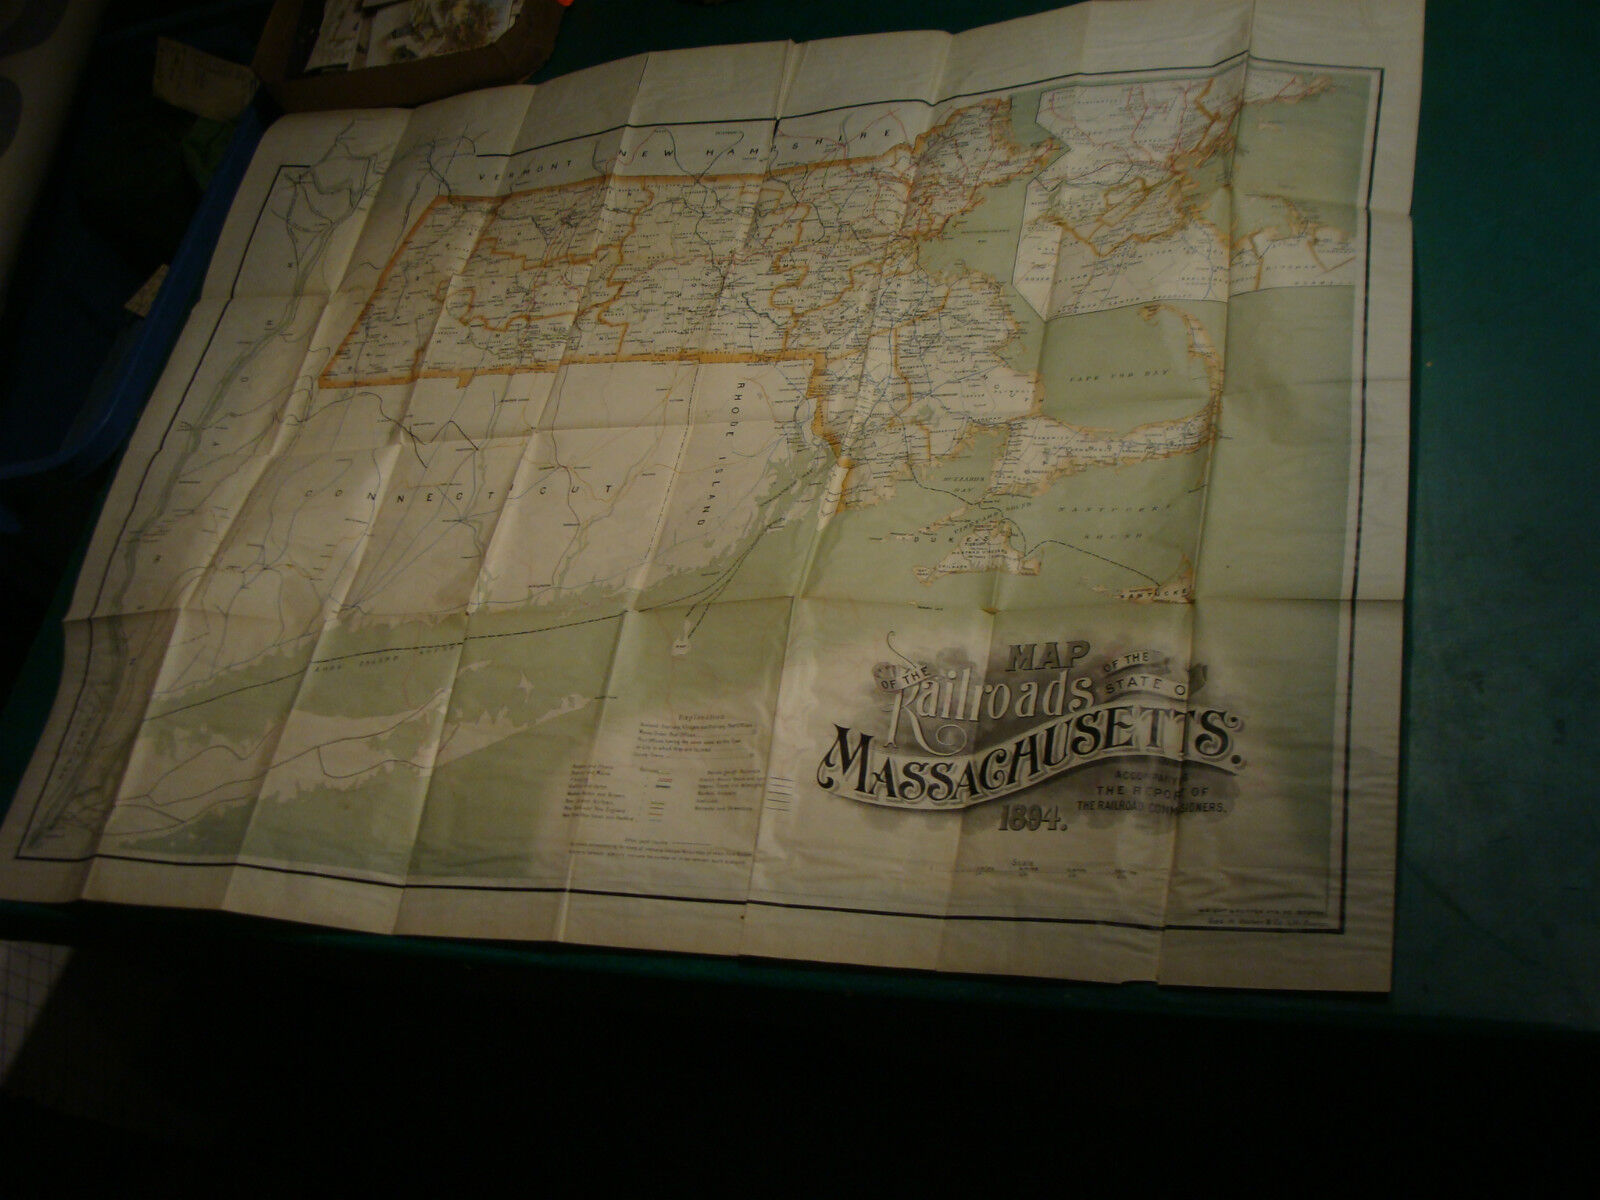 Original 1894 Map of the Railroads of the state of MASSACHUSETTS wright & potter